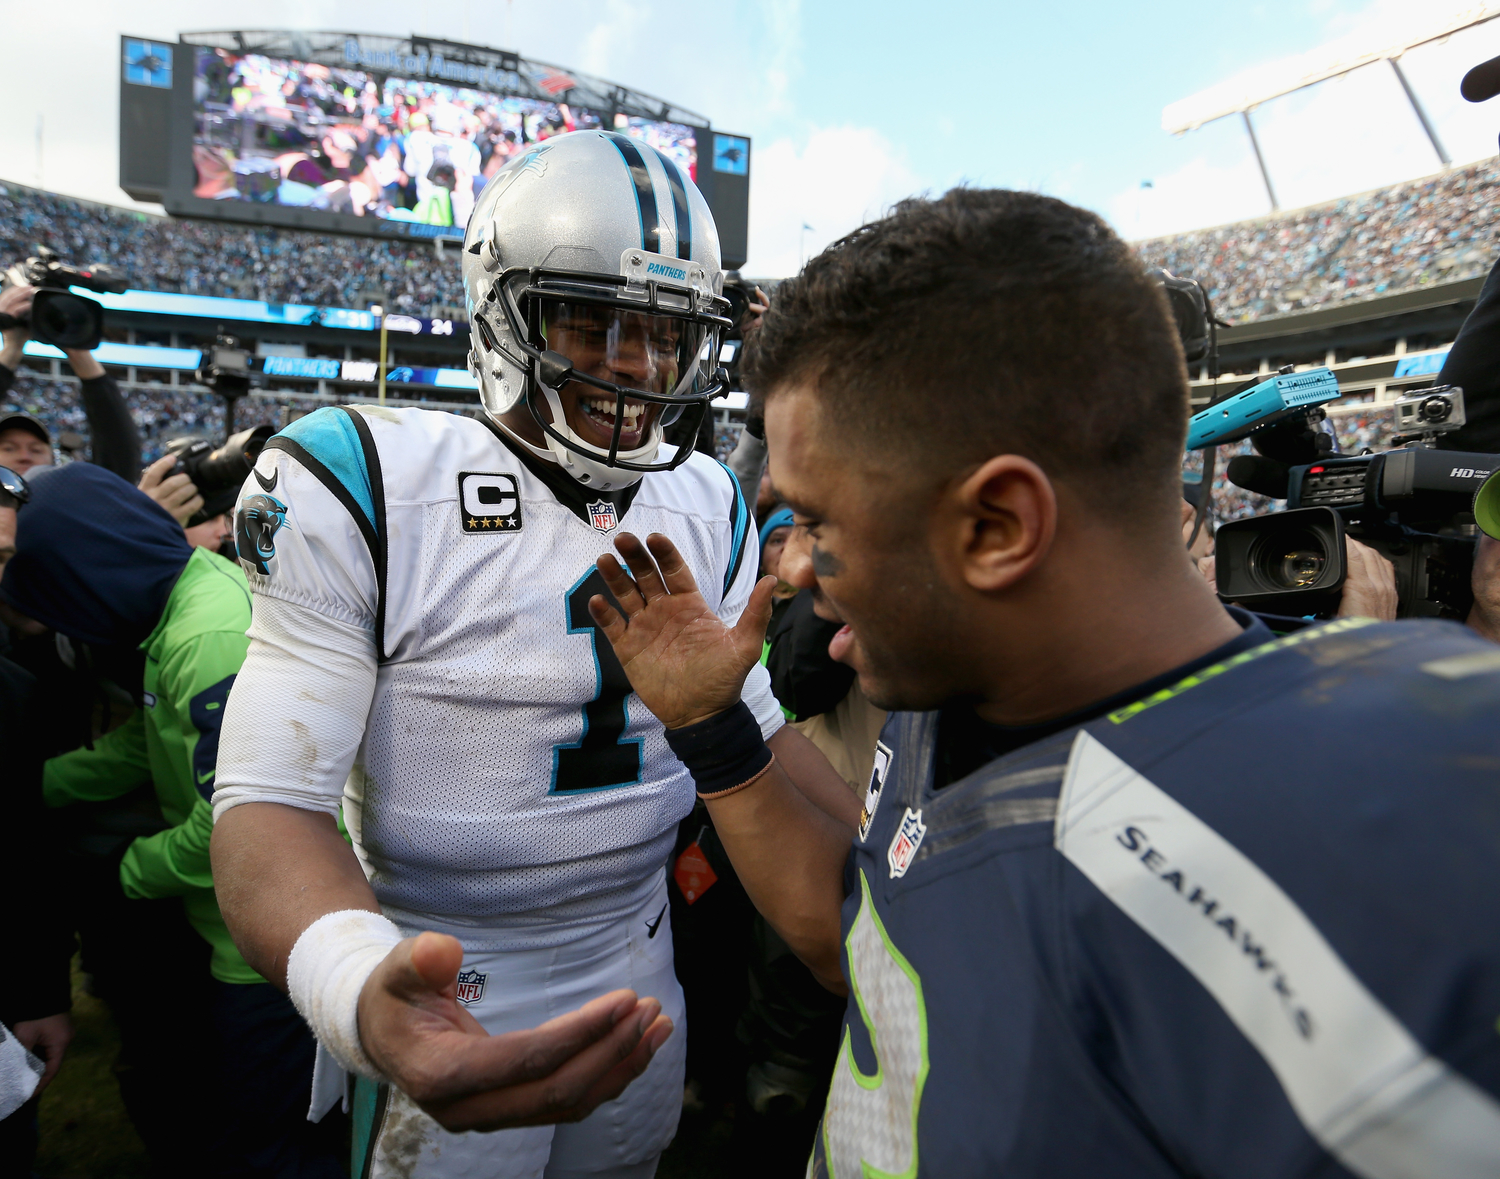 Cam Newton already accomplished the only achievement missing from Russell Wilson's resume, but the Seahawks QB still beats the Patriots star where it matters most with his $140 million contract and Super Bowl ring.